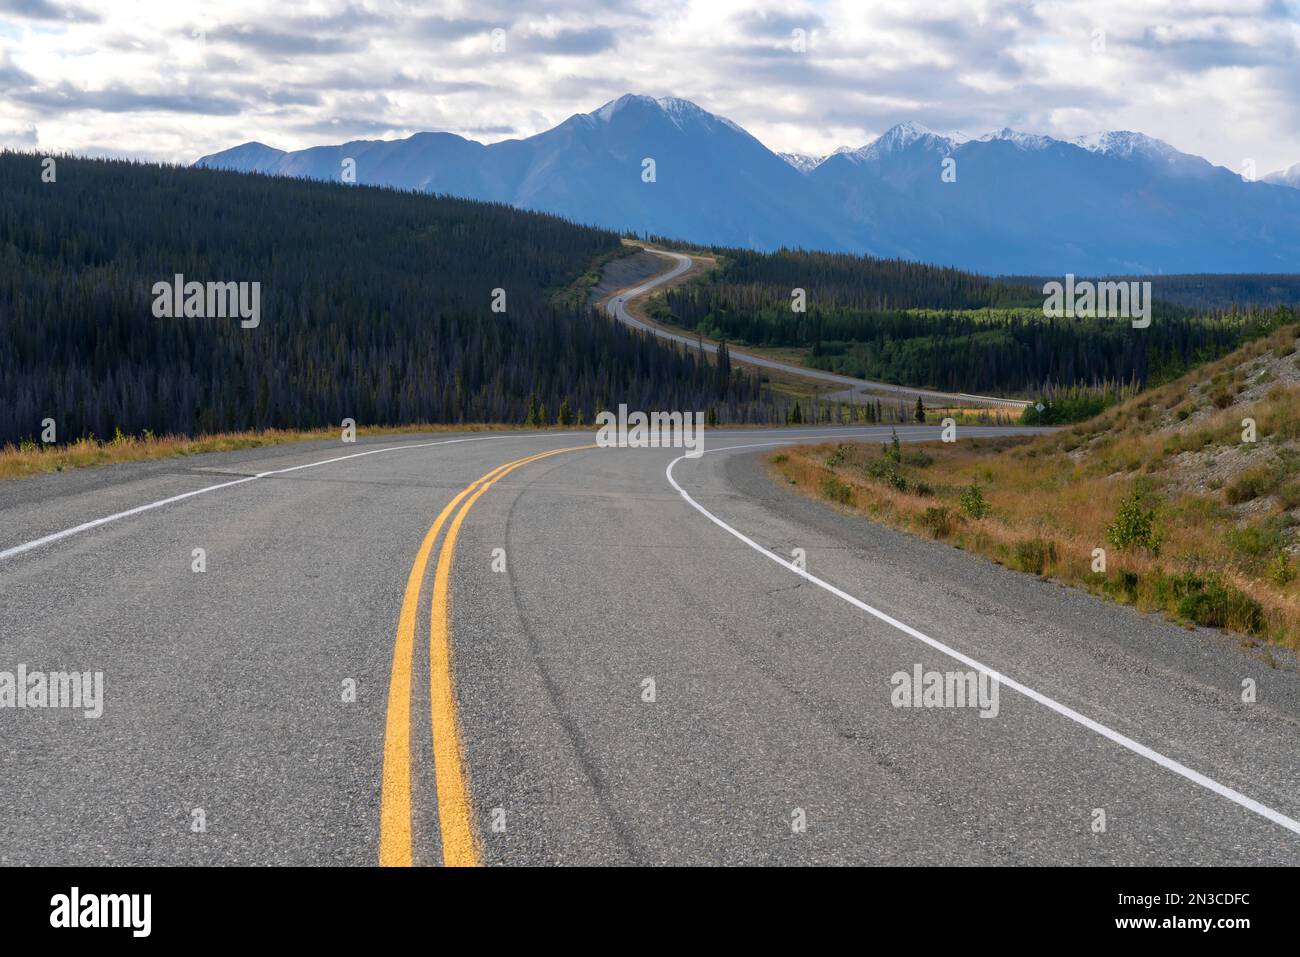 The Alaska Highway winding its way north on its way to Alaska with the mountains of Kluane National Park seen in the distance; Yukon, Canada Stock Photo